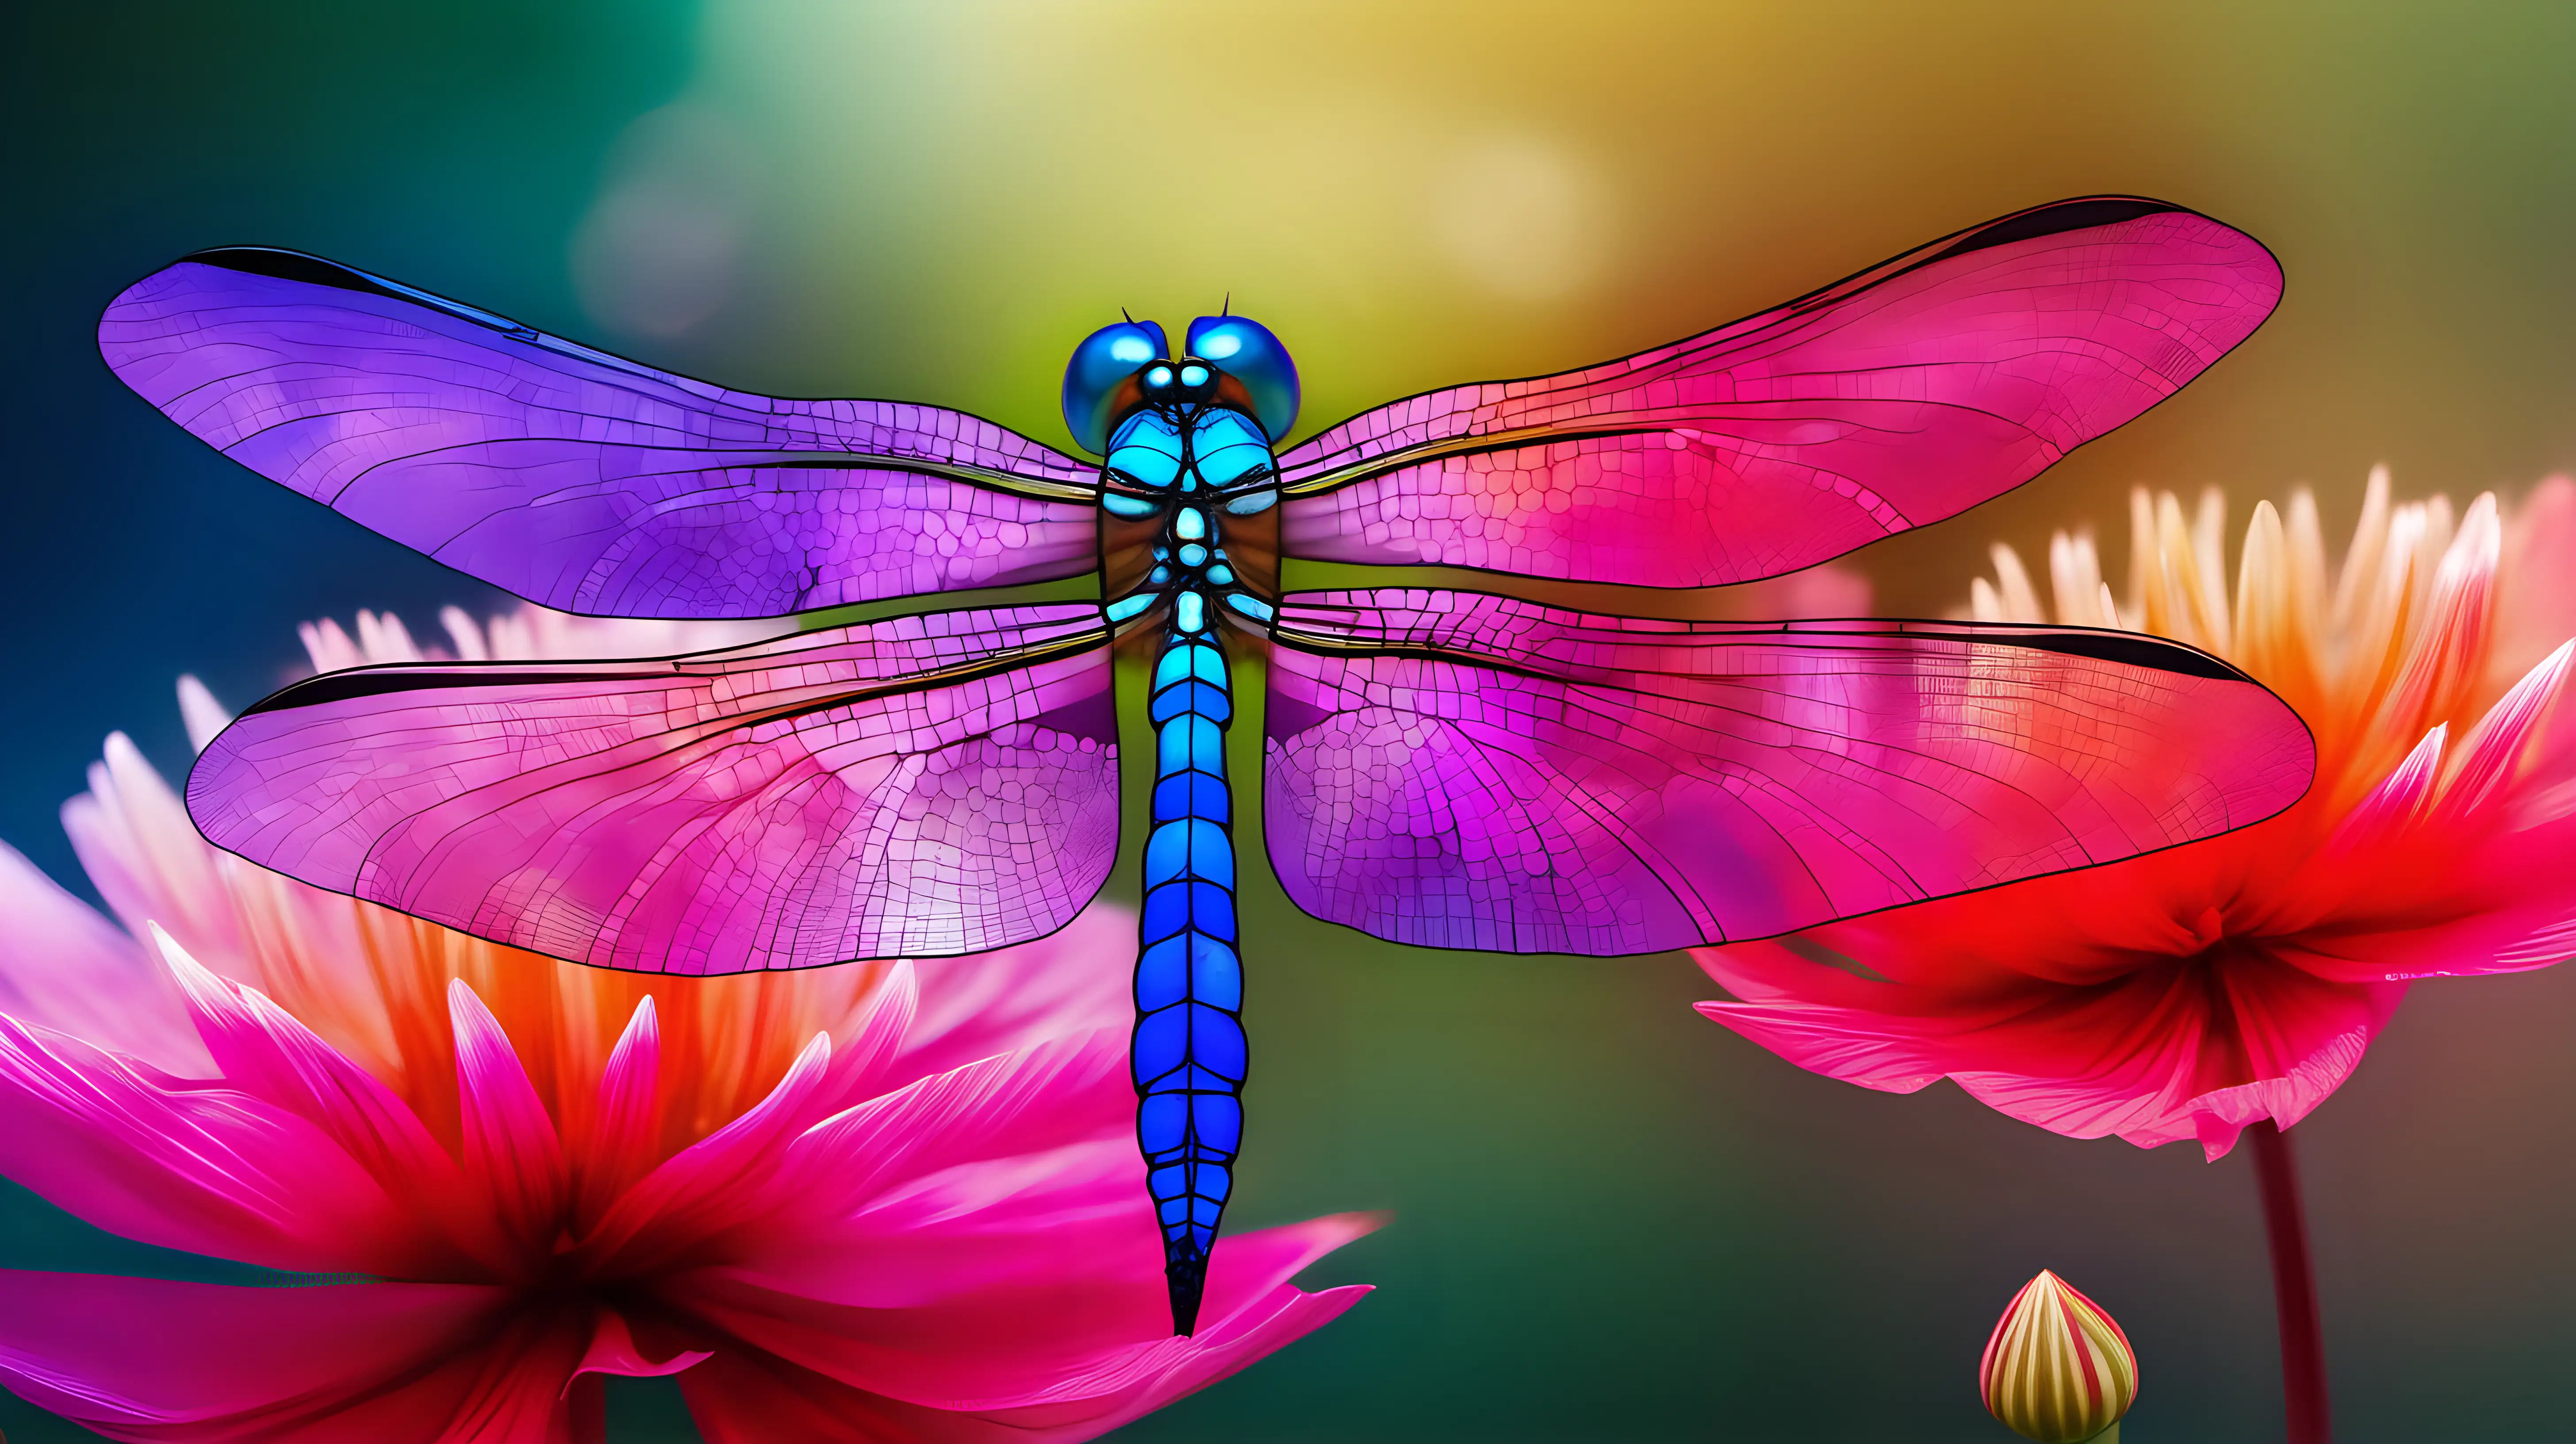 An artistic composition featuring a dragonfly resting on a vibrant flower, emphasizing the contrast between its translucent wings and the floral hues.